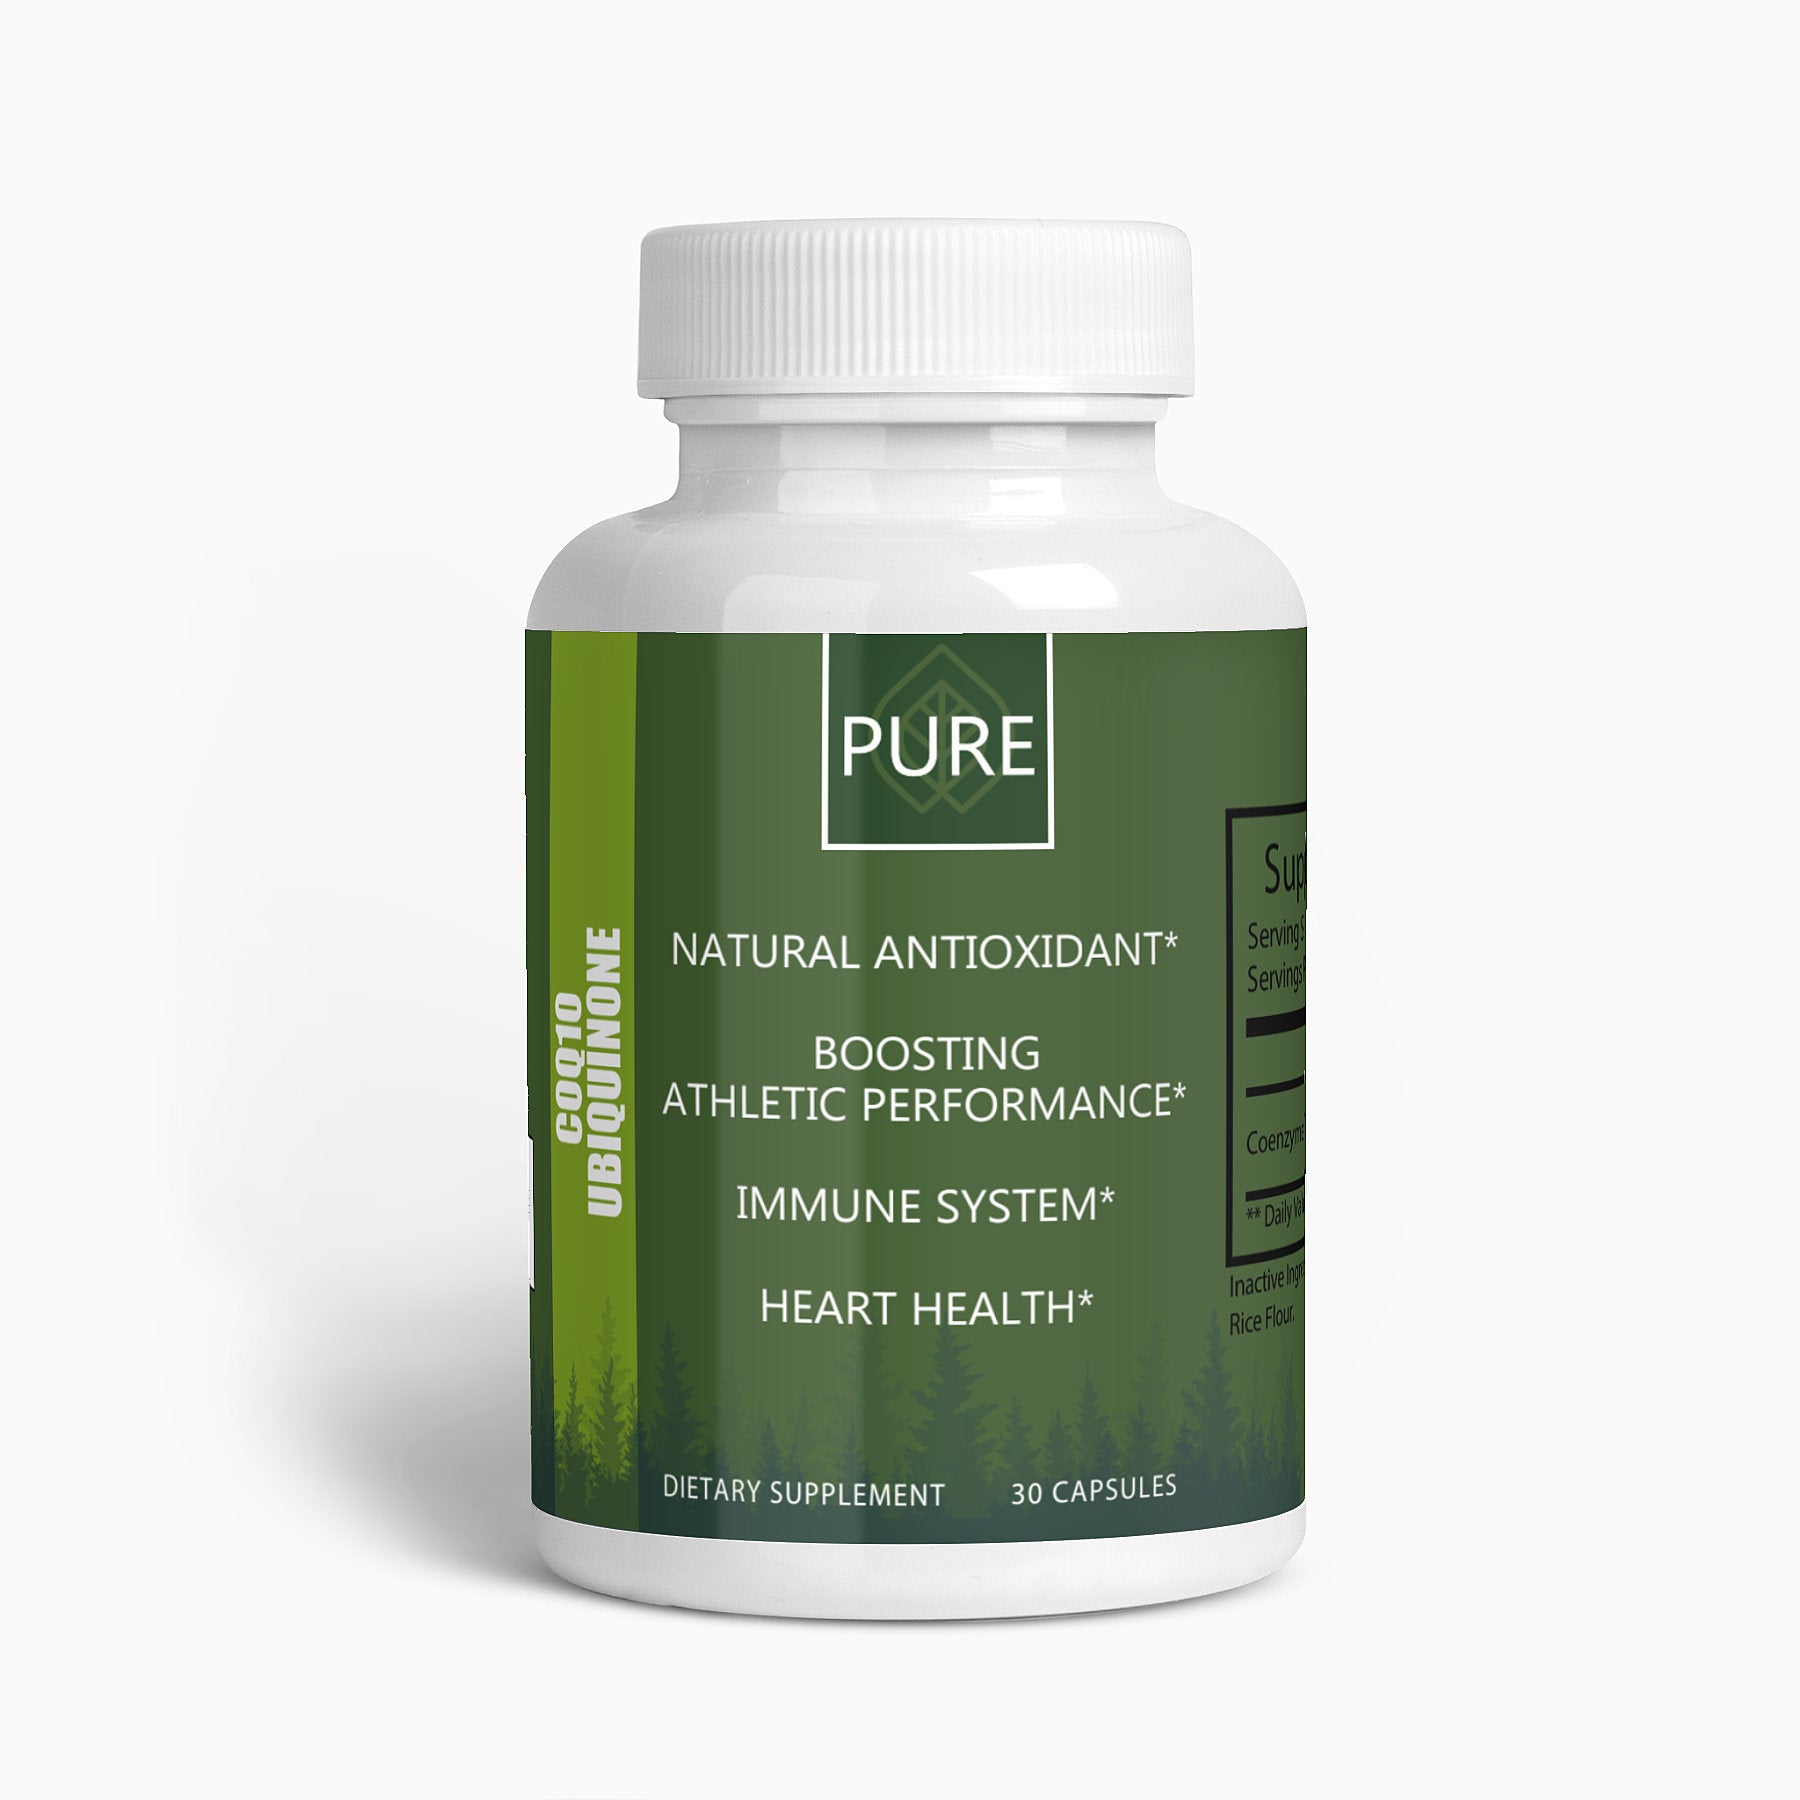 PURE. Coenzyme Q10 Ubiquinone - Powerful Natural Antioxidant for Energy and Immunity PURE Supplement